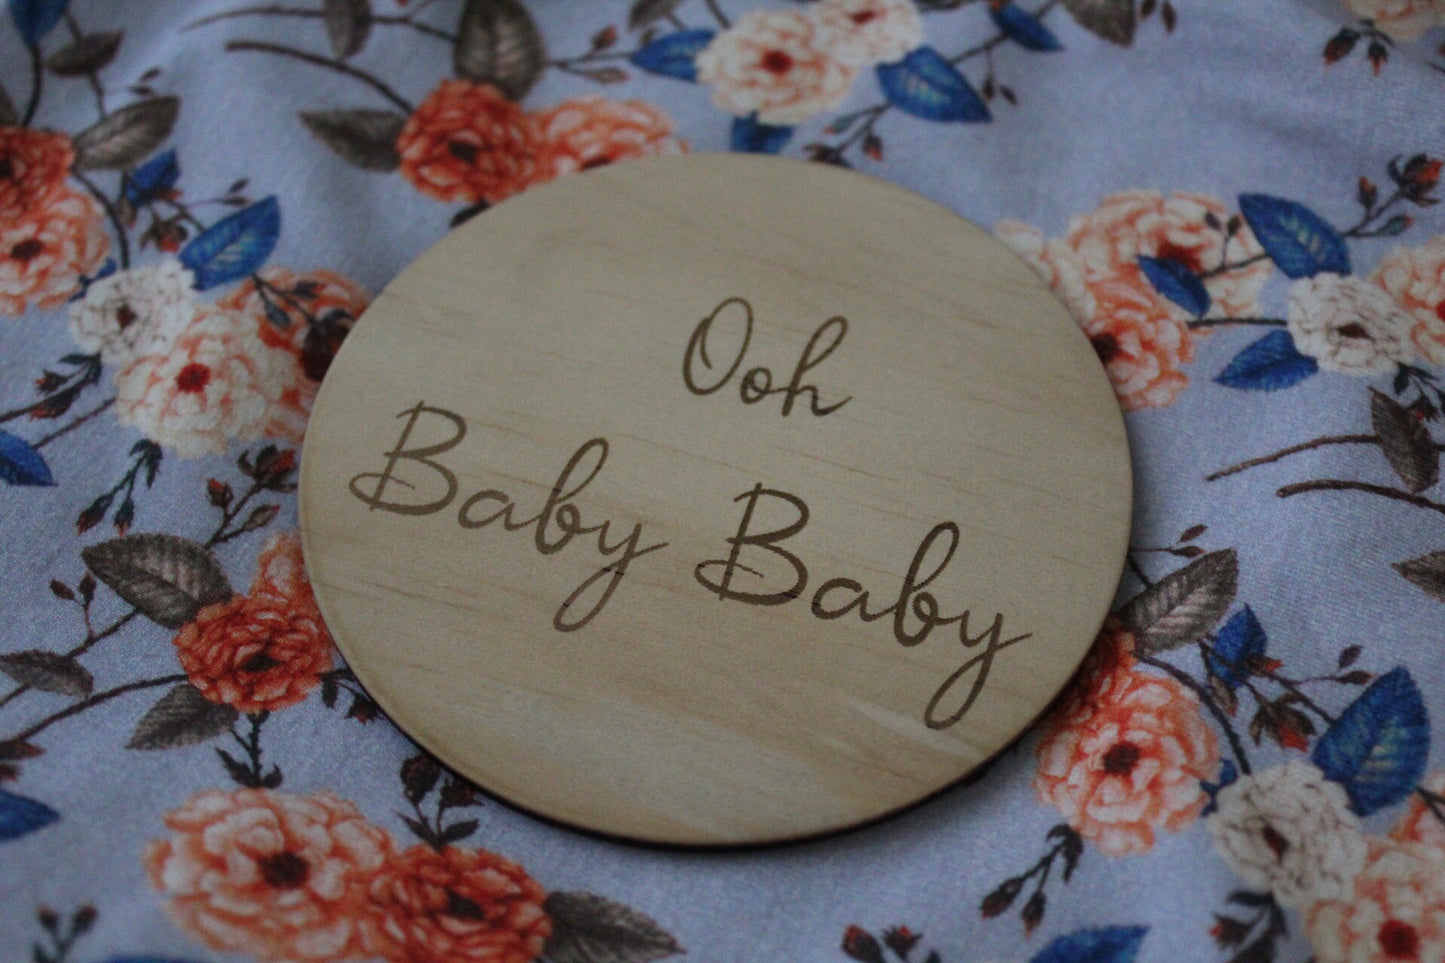 “Ooh baby baby” raw wooden disc